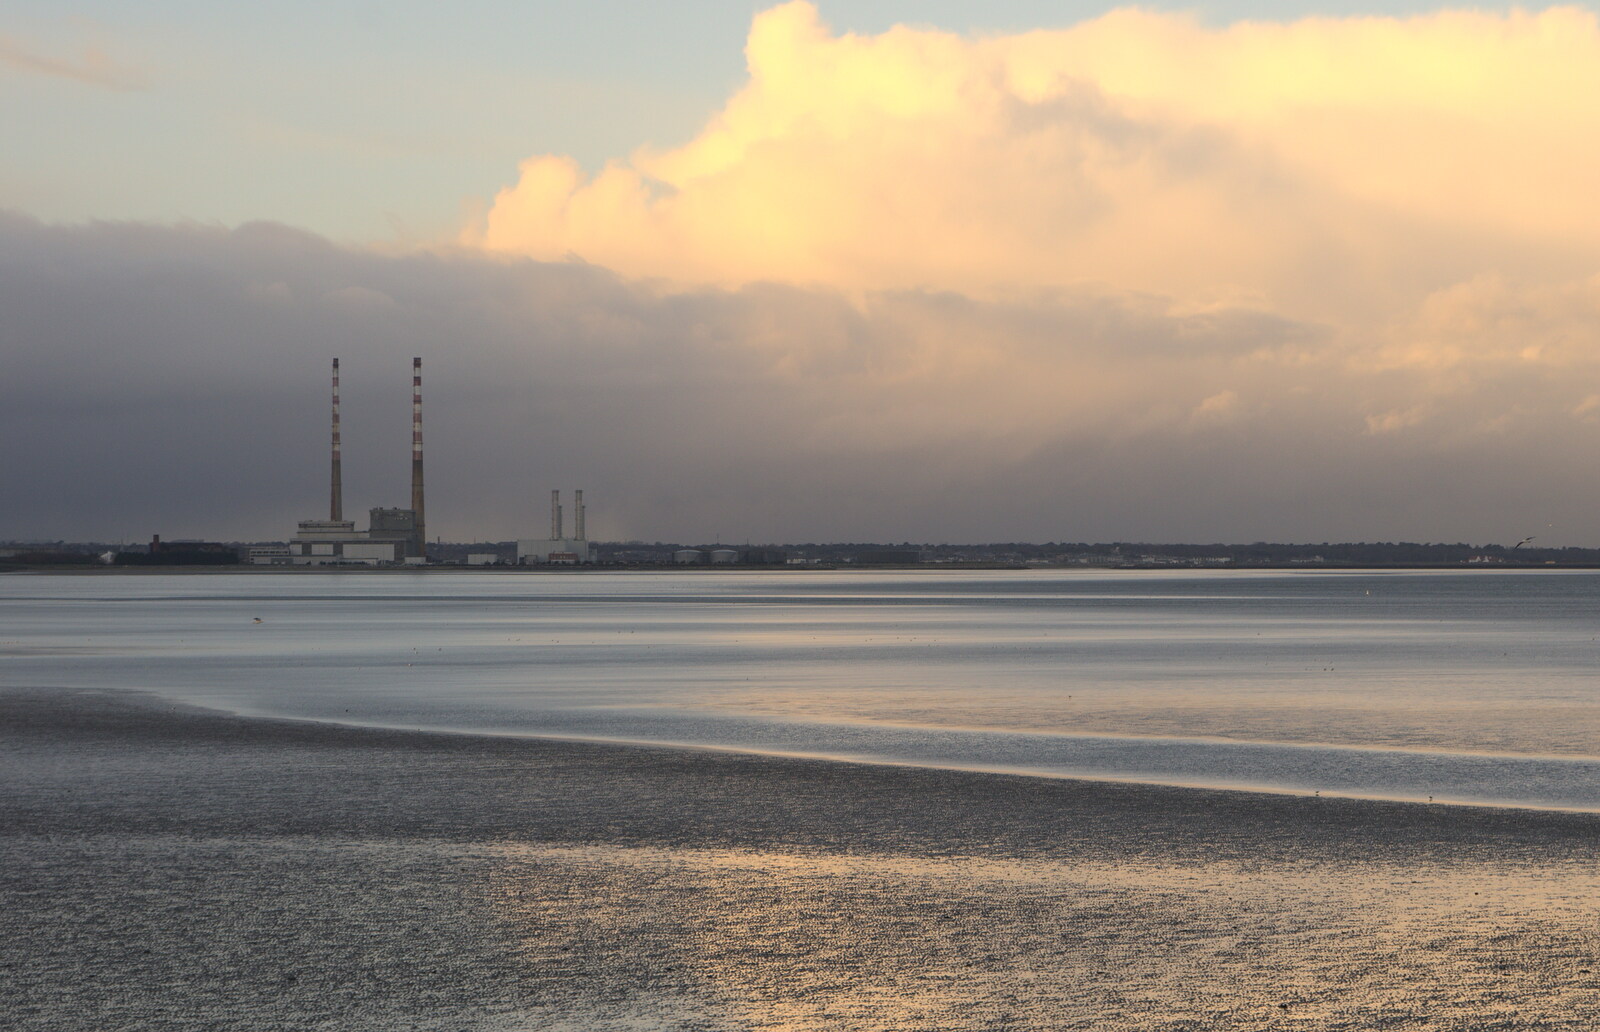 Evening clouds roll in over Poolbeg Winkies from Christmas Eve in Dublin and Blackrock, Ireland - 24th December 2015